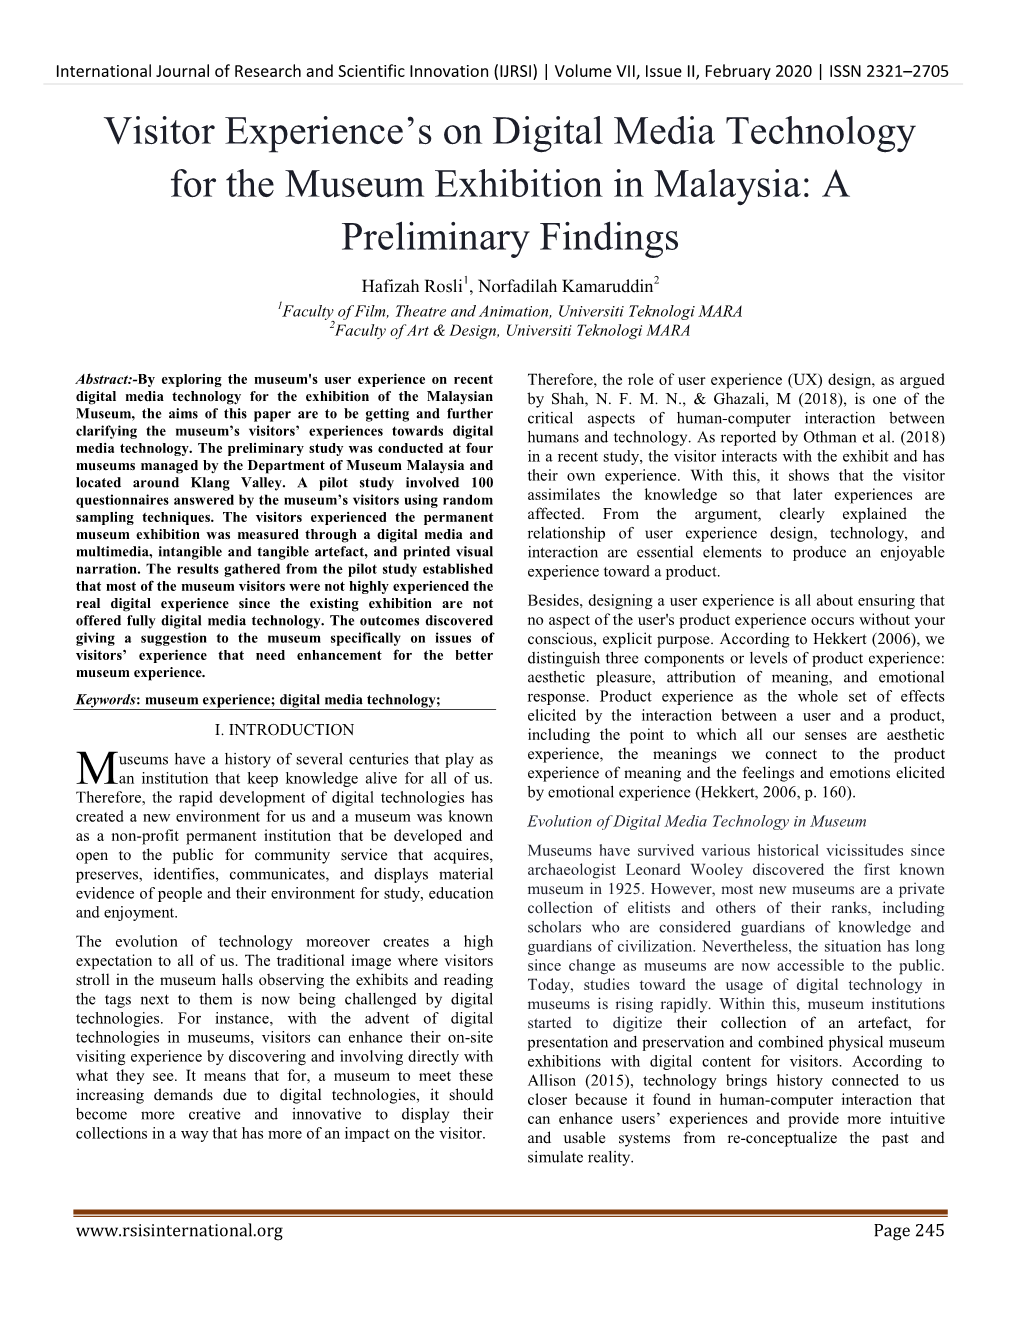 Visitor Experience's on Digital Media Technology for the Museum